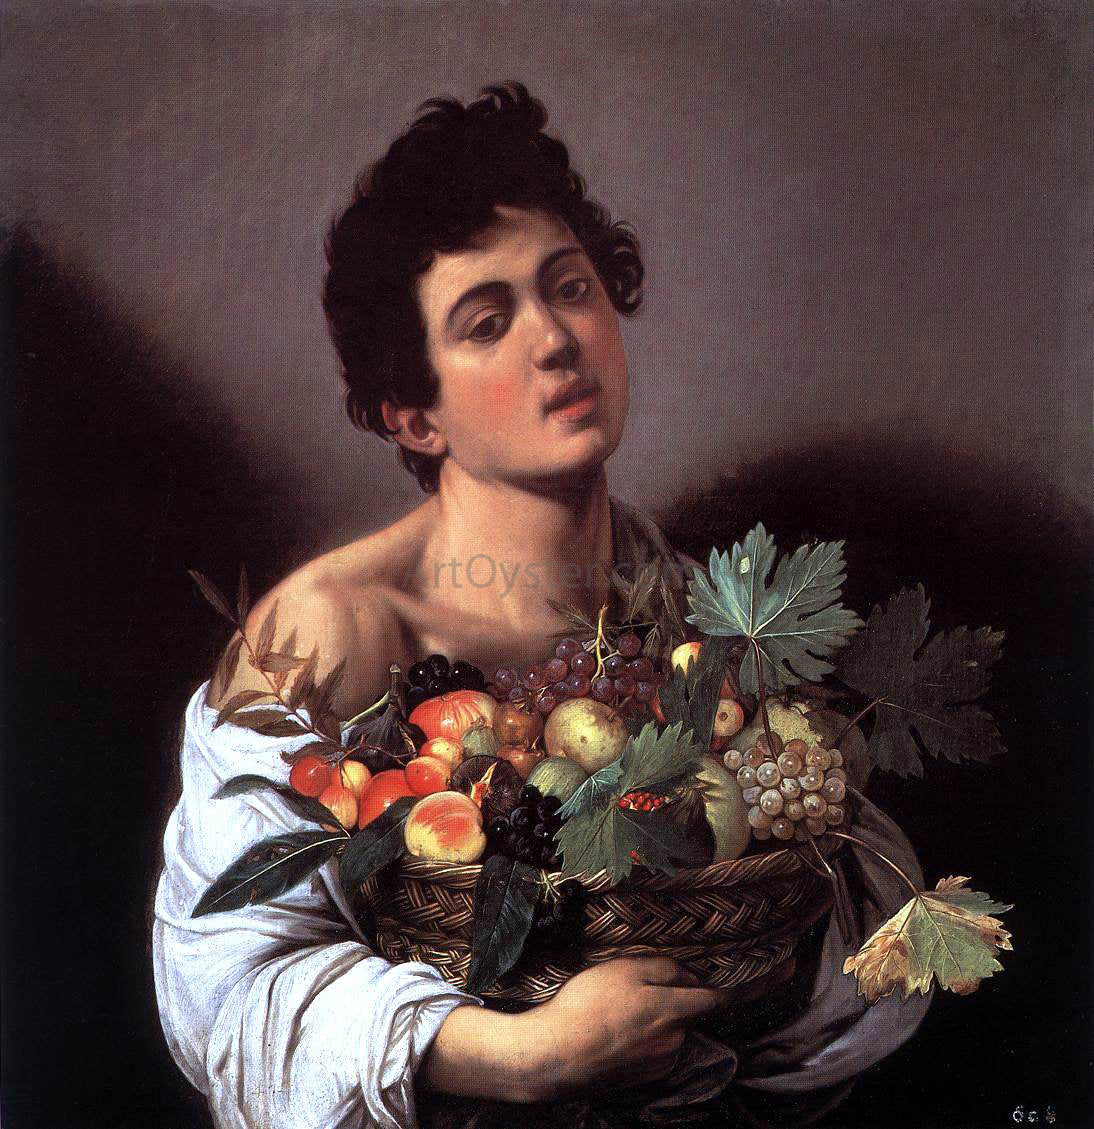  Caravaggio Merisi Boy with a Basket of Fruit - Hand Painted Oil Painting